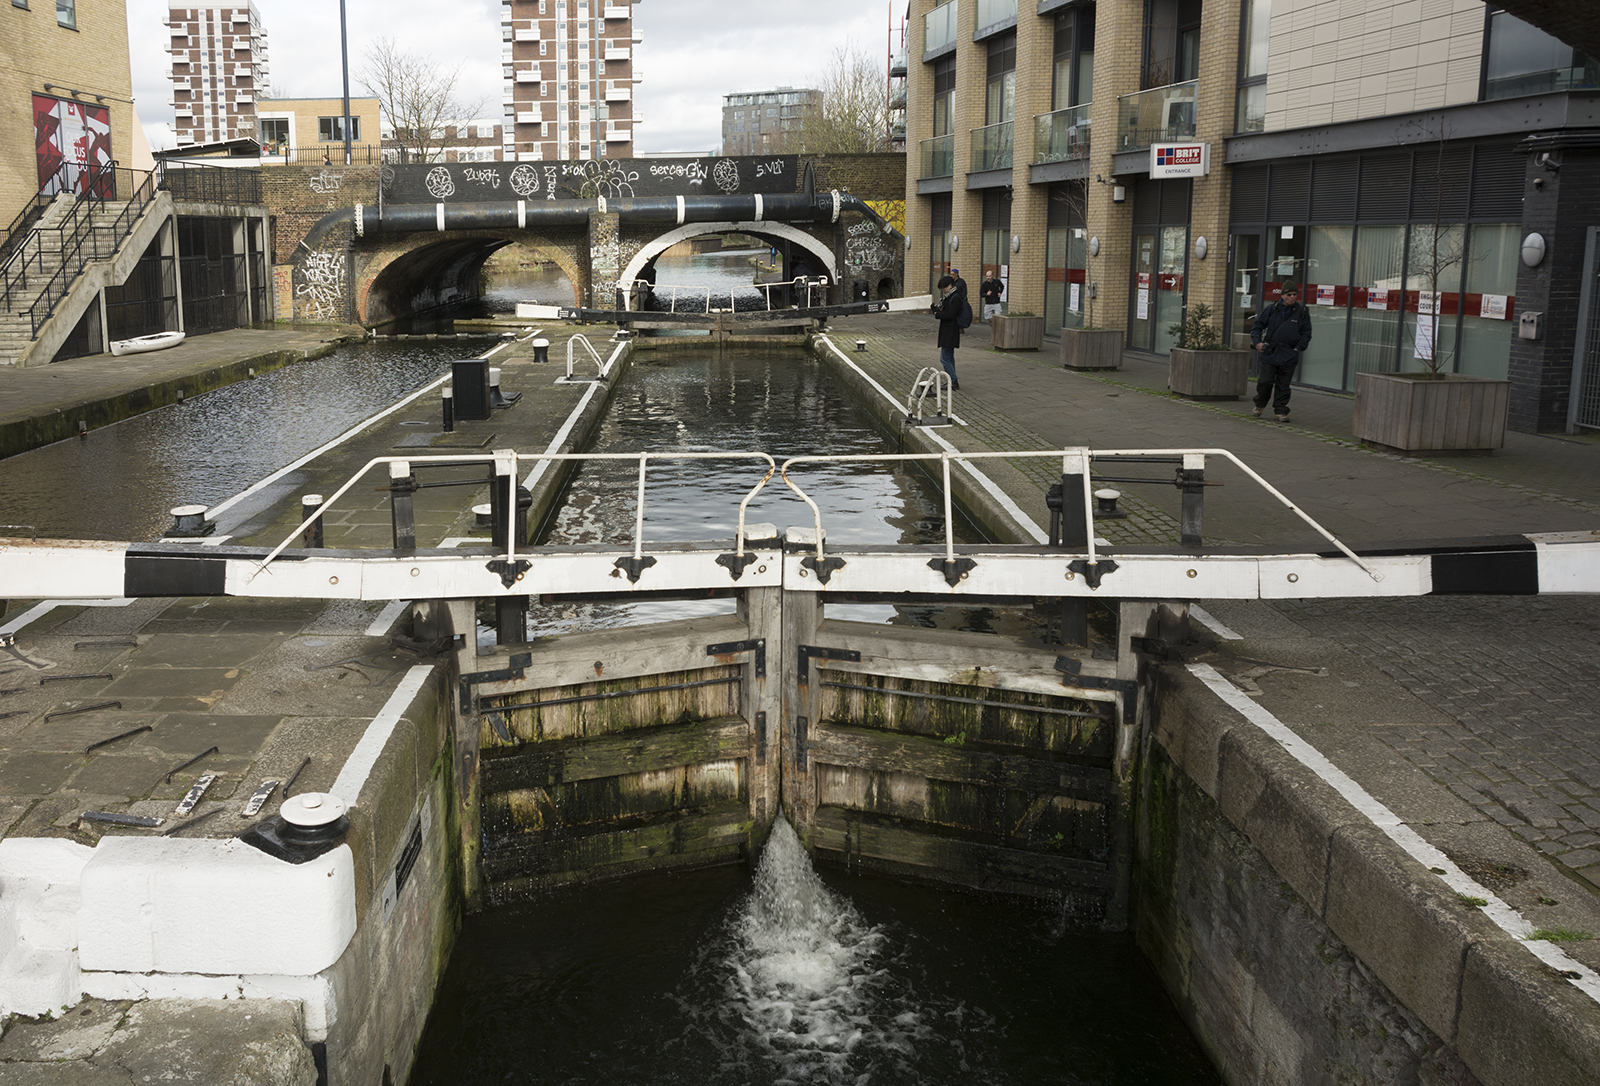 2017-02-26-Tower-Hamlets_Canals-and-Rivers_Landscape_Winter-Limehouse-Basin